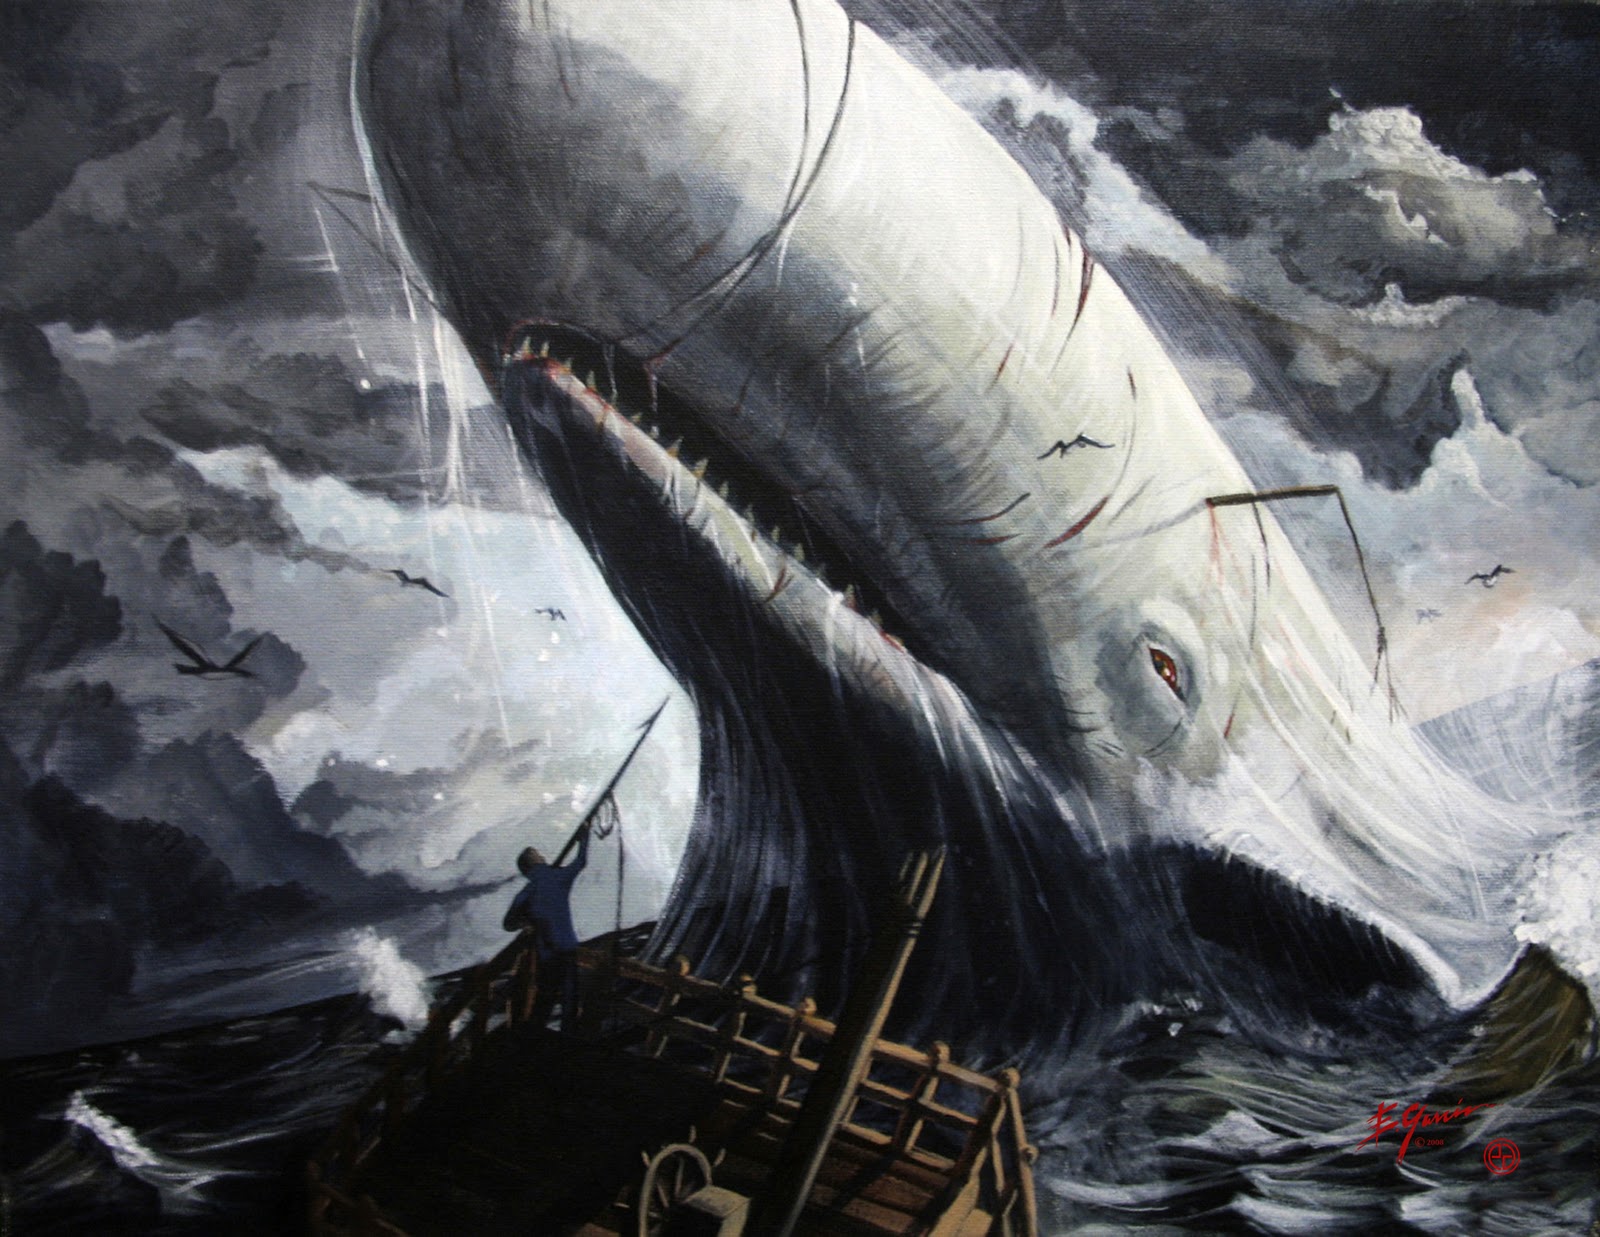 who played ahab in the original film version of moby dick 1930